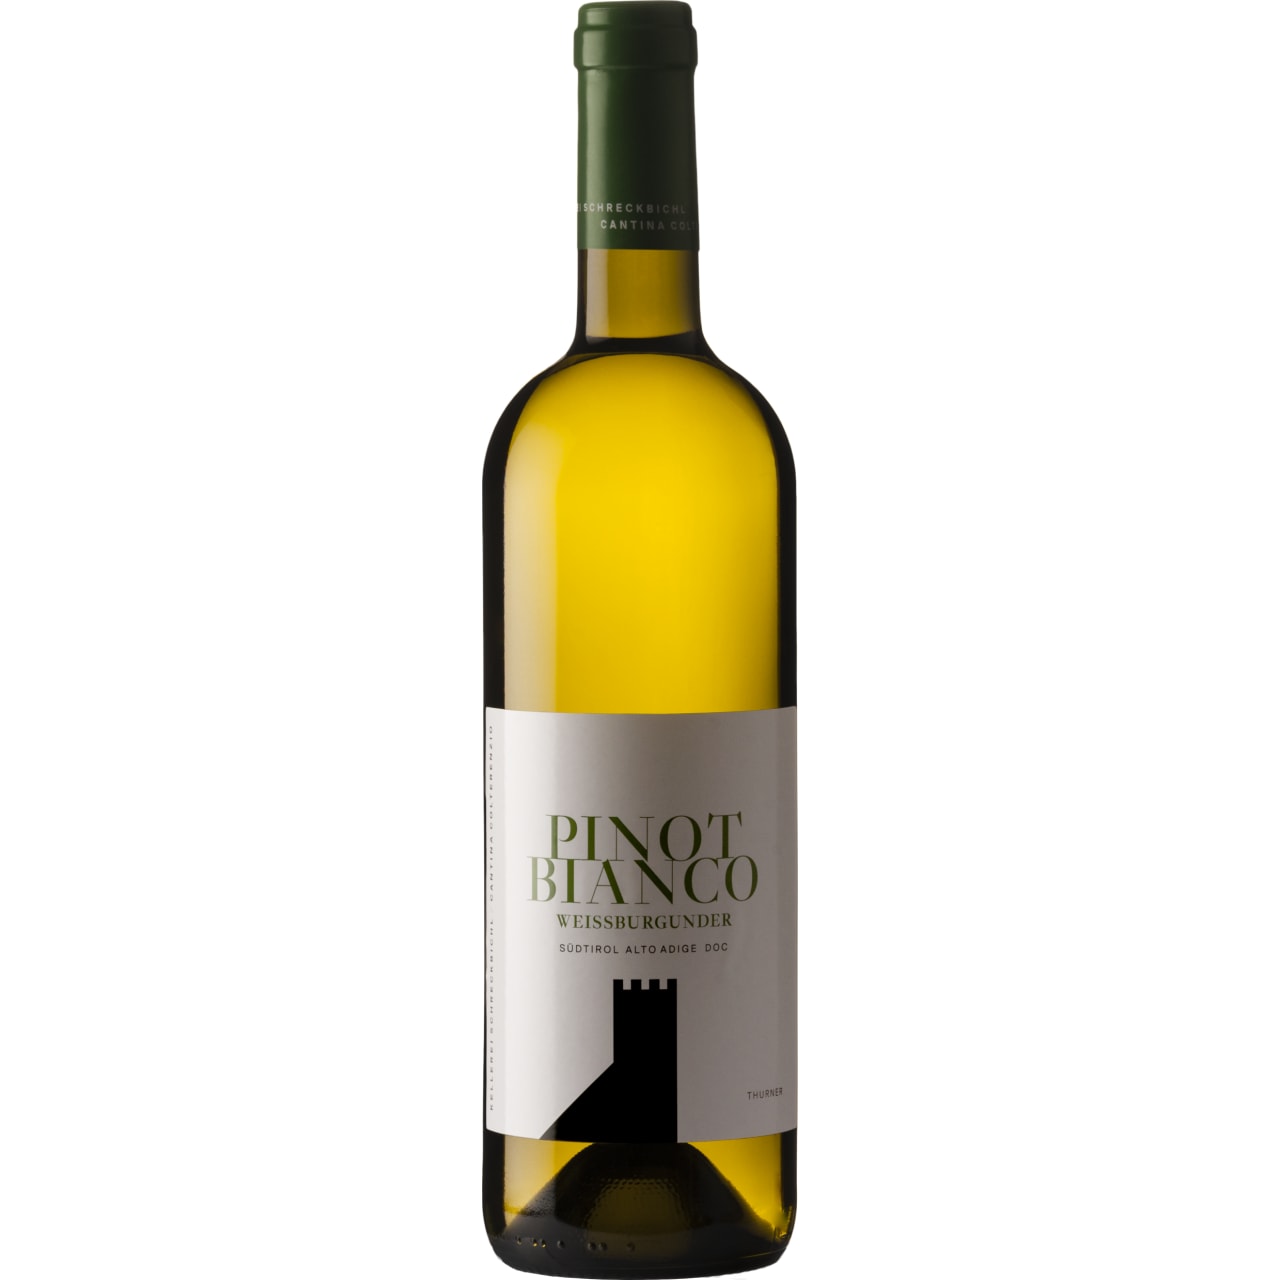 Displays a fresh aroma and flavour reminiscent of green apples with a crisp palate and a touch of honeyed complexity.